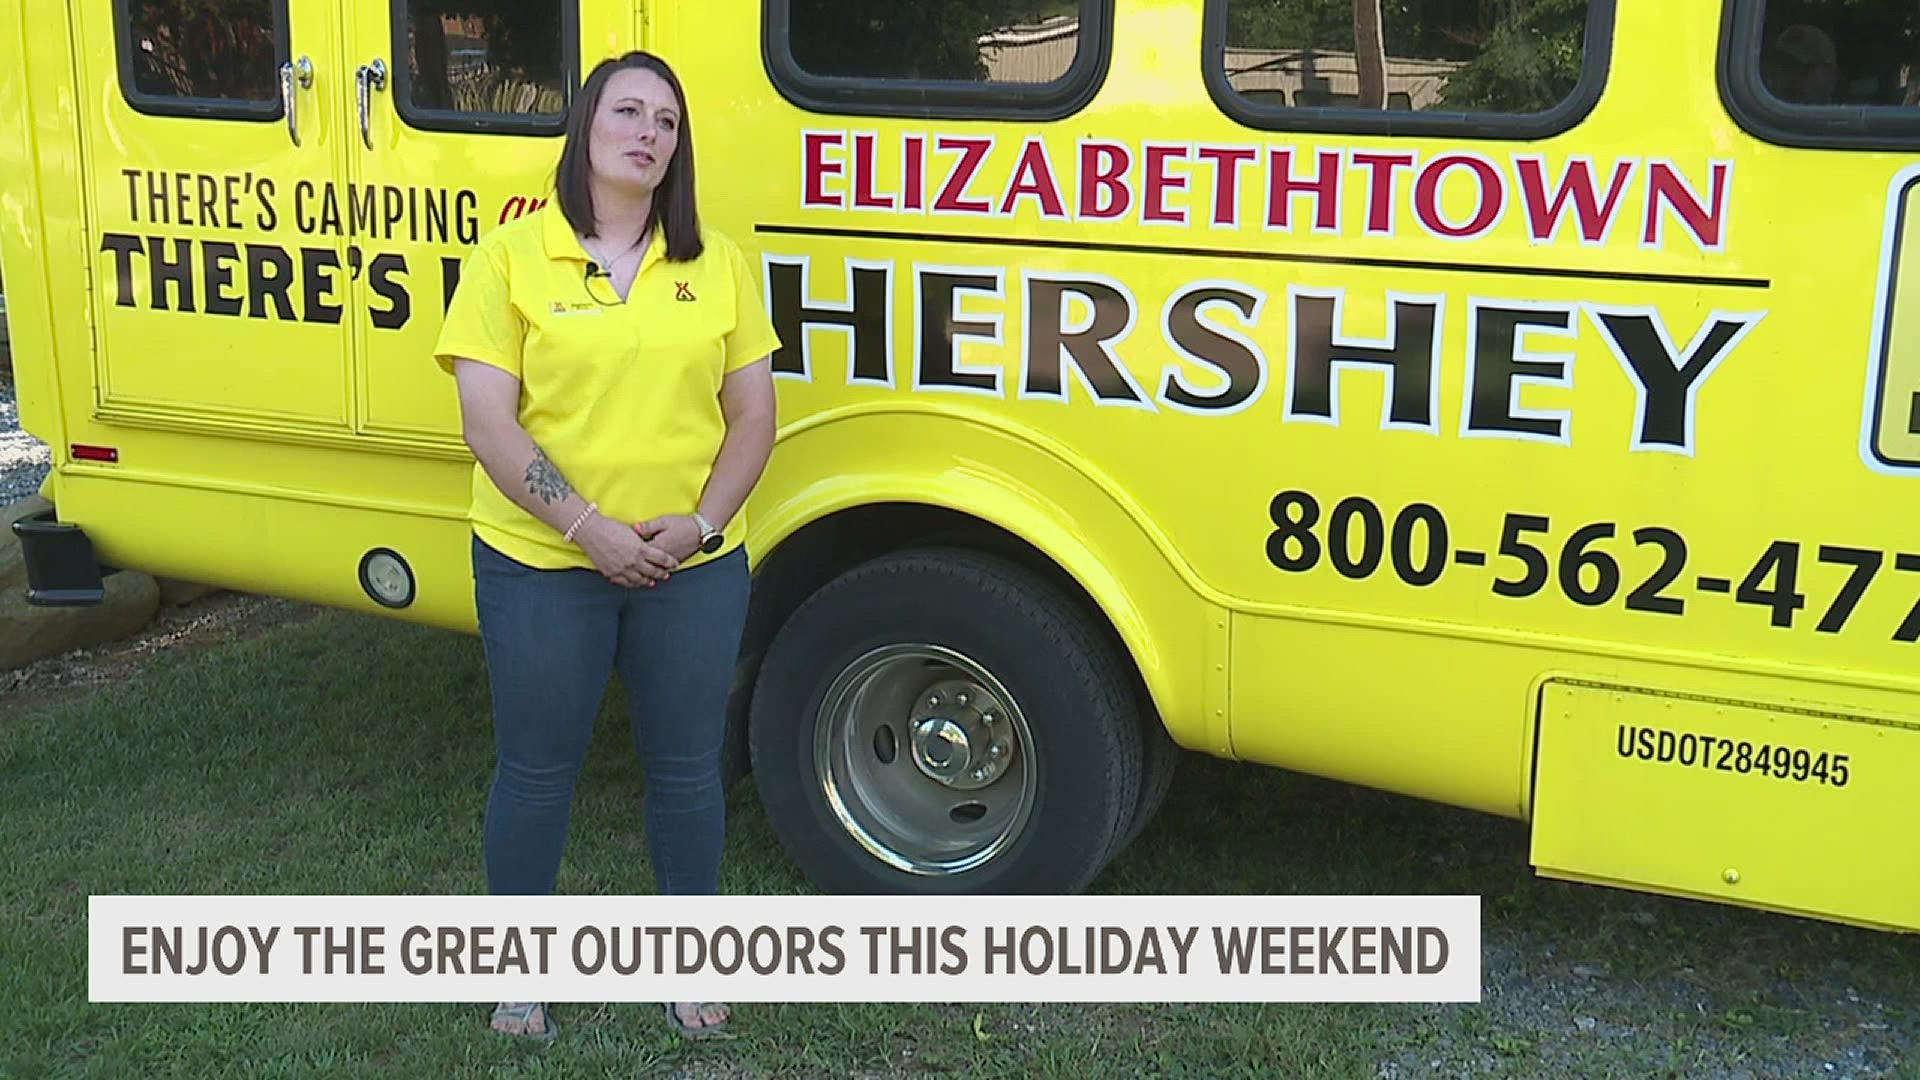 The Elizabethtown-Hershey KOA is a clean and quiet spot that provides some of the best family fun camping experiences in the area.